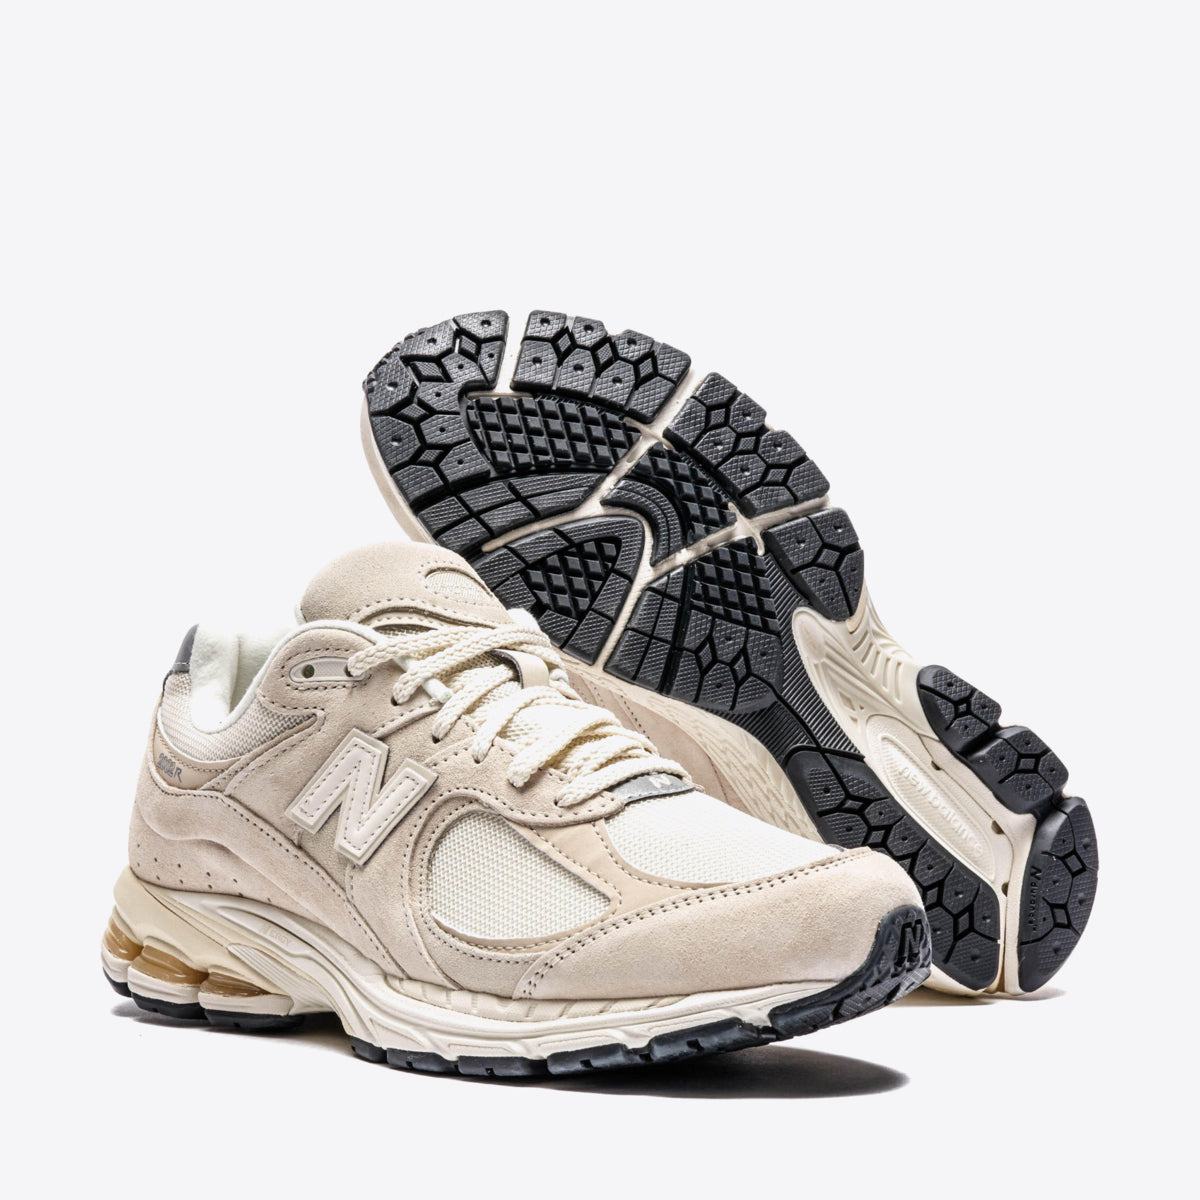 NEW BALANCE 2002R Sneaker Calm Taupe - Image 4